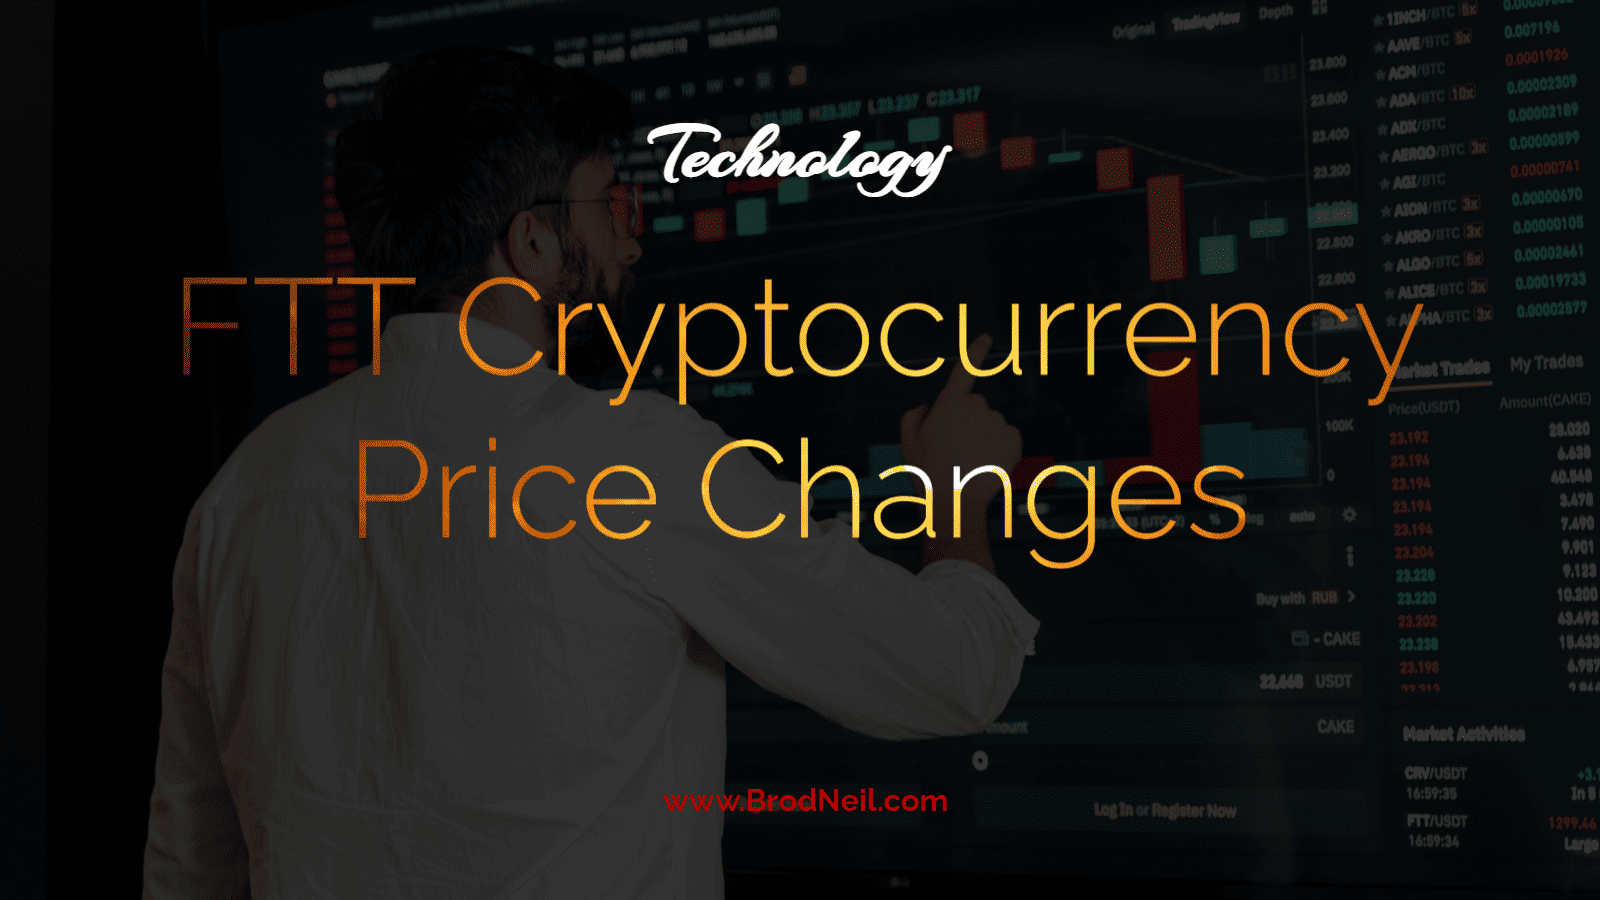 History of FTT Cryptocurrency Price Changes